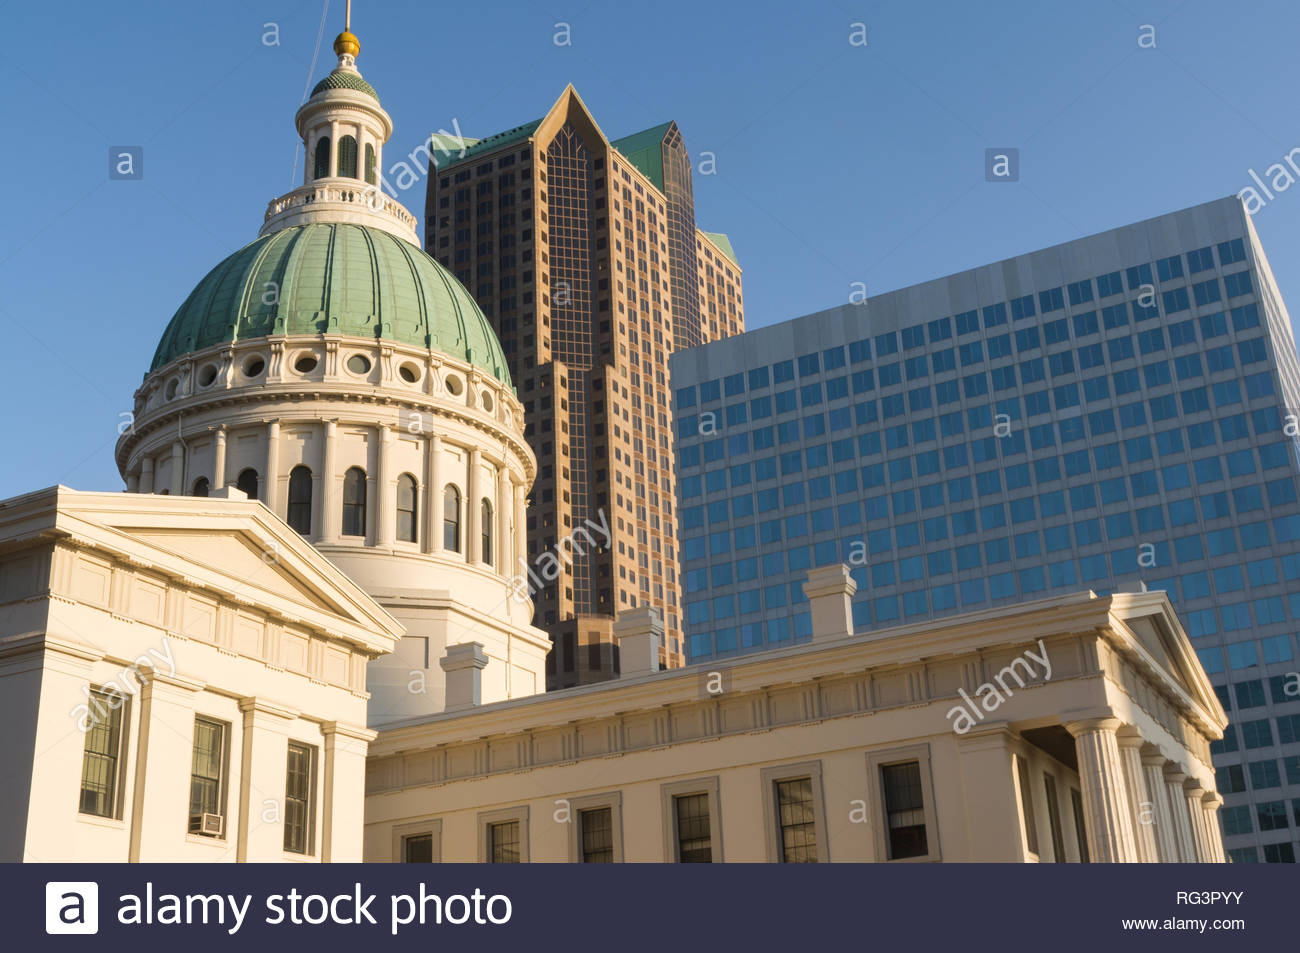 The Historic Old Courthouse With Downtown Skyline In